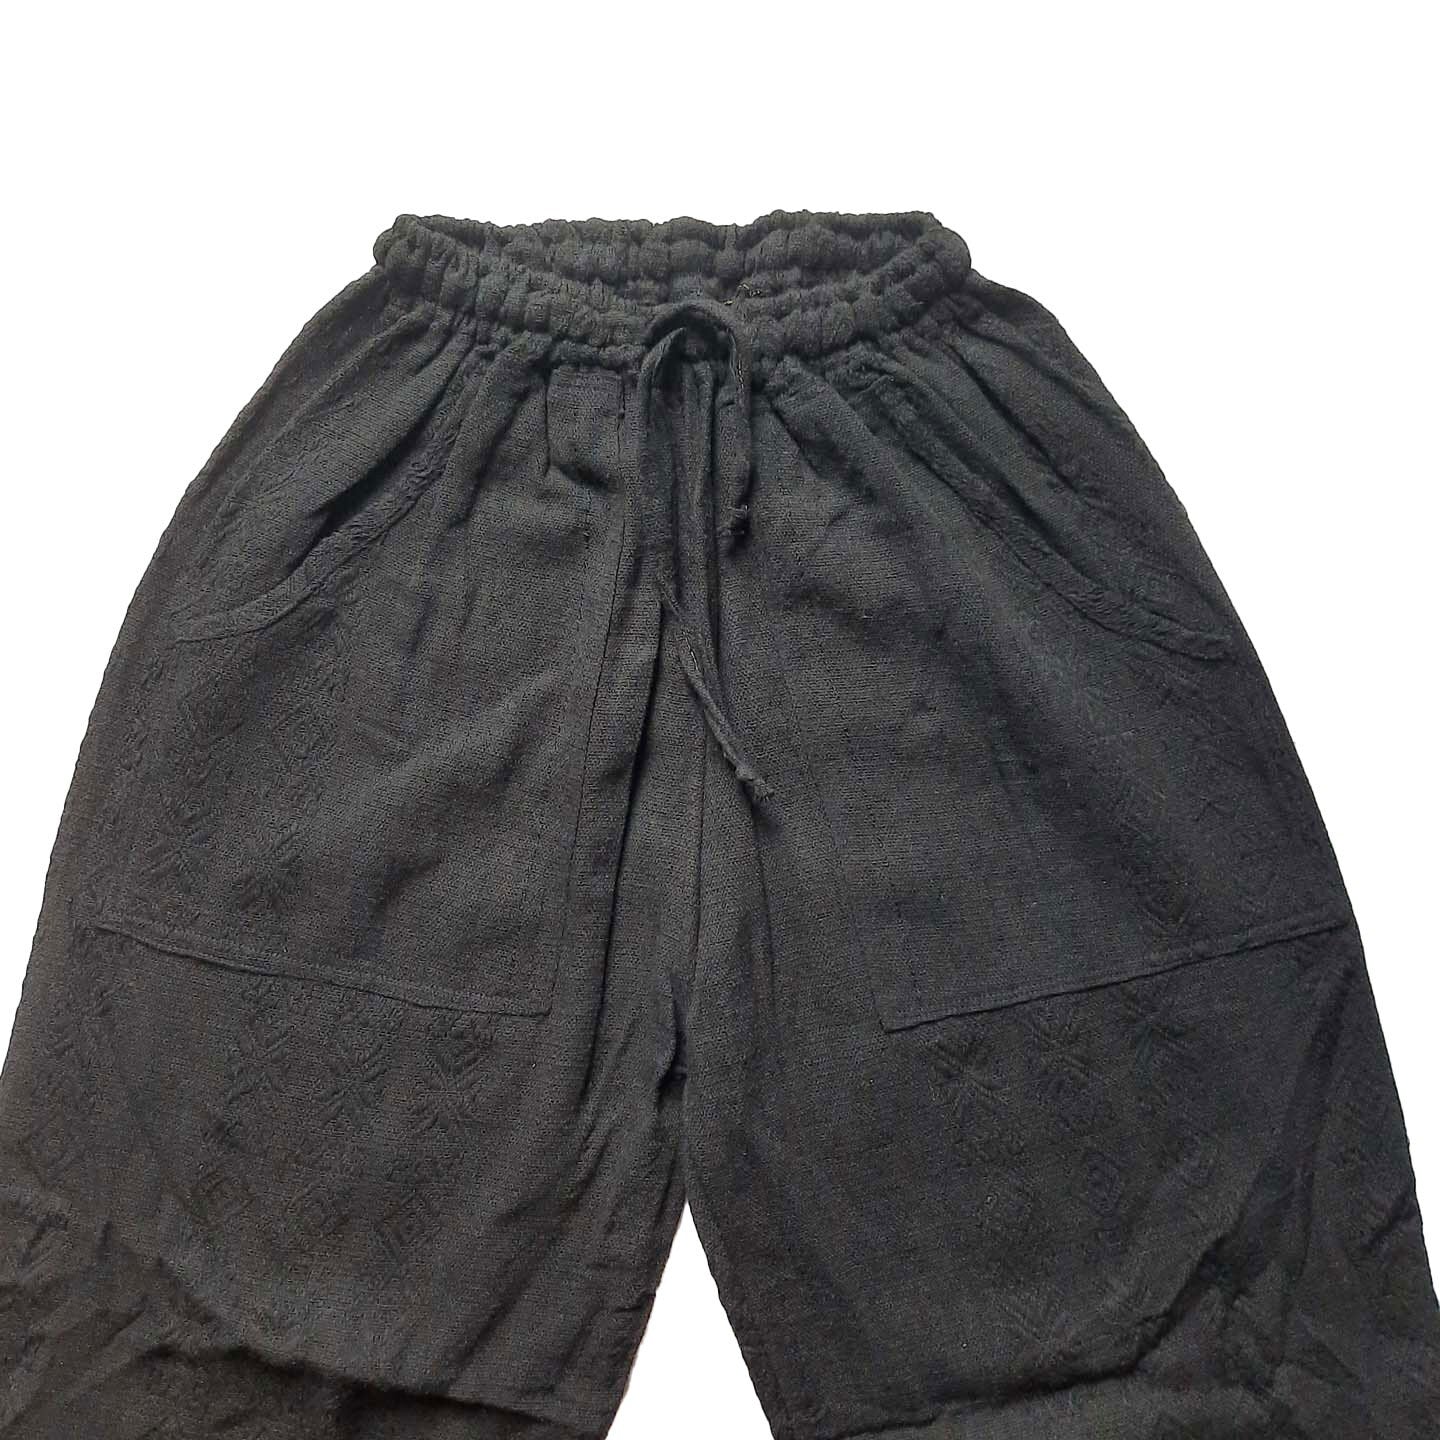 Pants Size M | Hippie Pants | Loungewear Womens Pants | Comfy Clothes | Mens Pants with Pockets | Black | Father's Day Gift